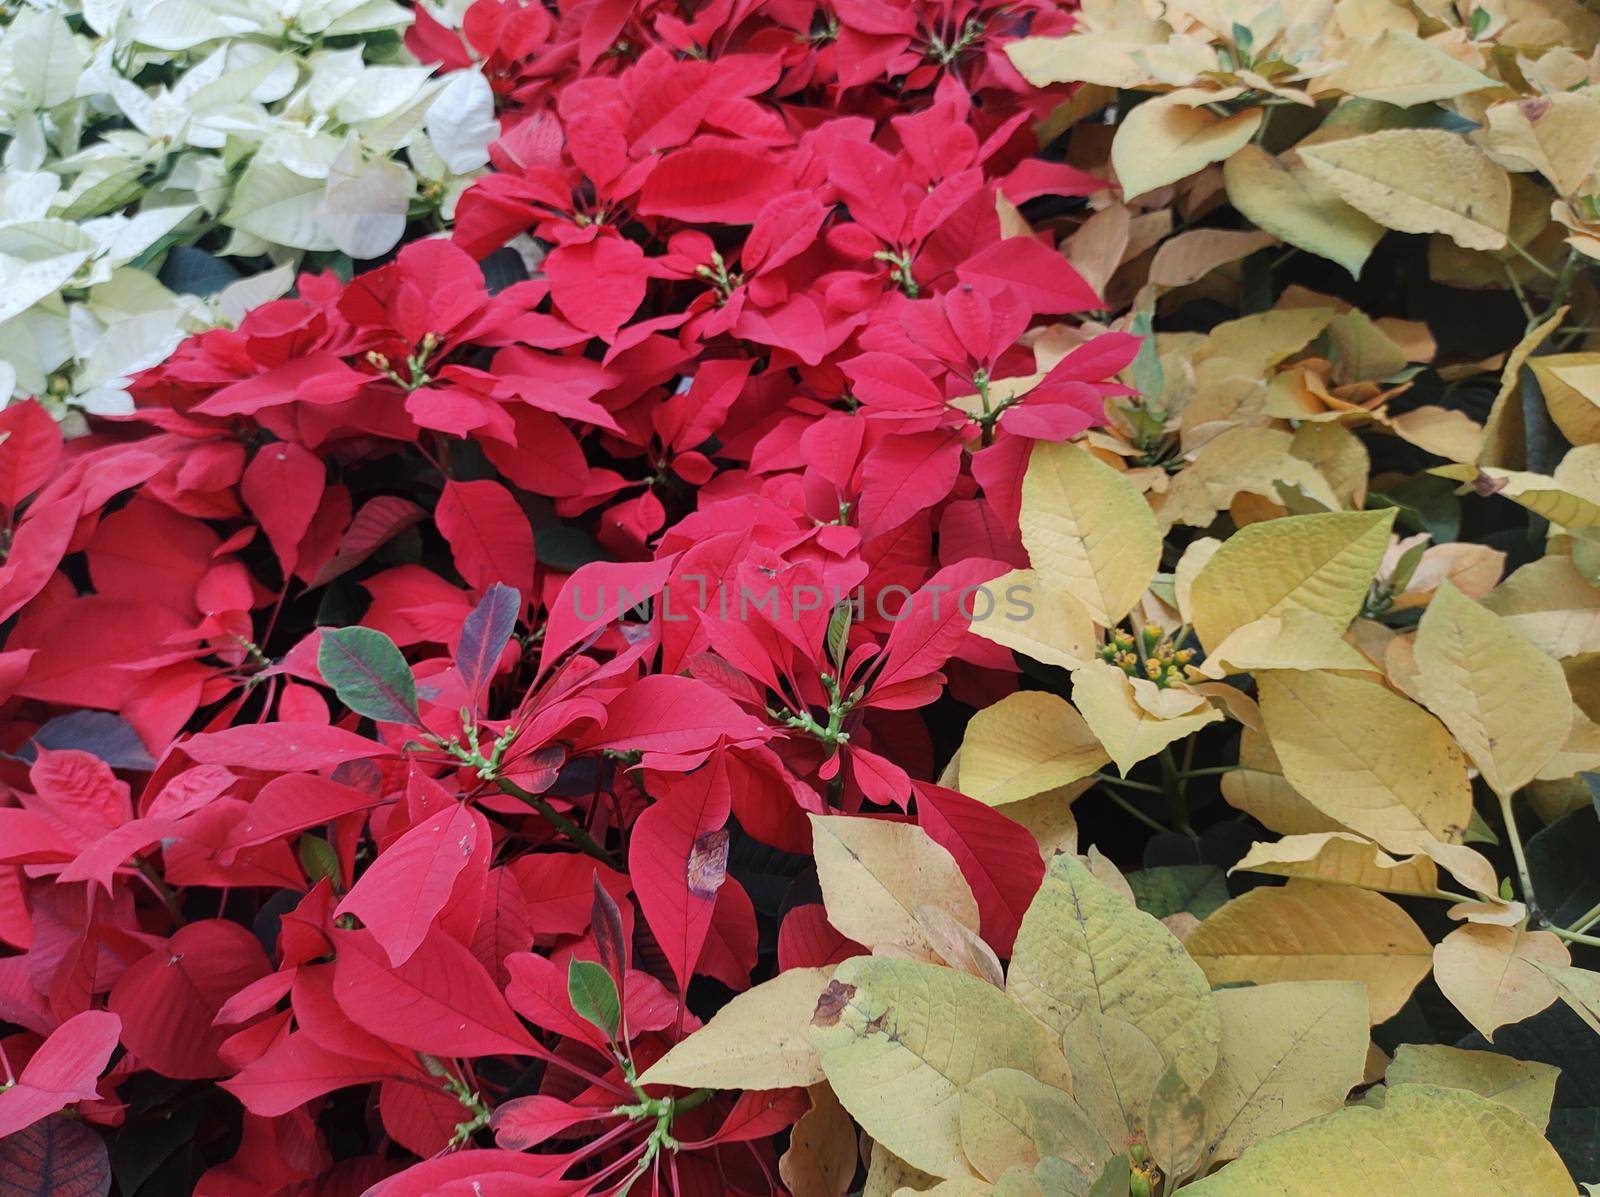 Top view of garden beds lined with yellow, red and white poinsettias with stripe effect (Euphorbia pulcherrima).